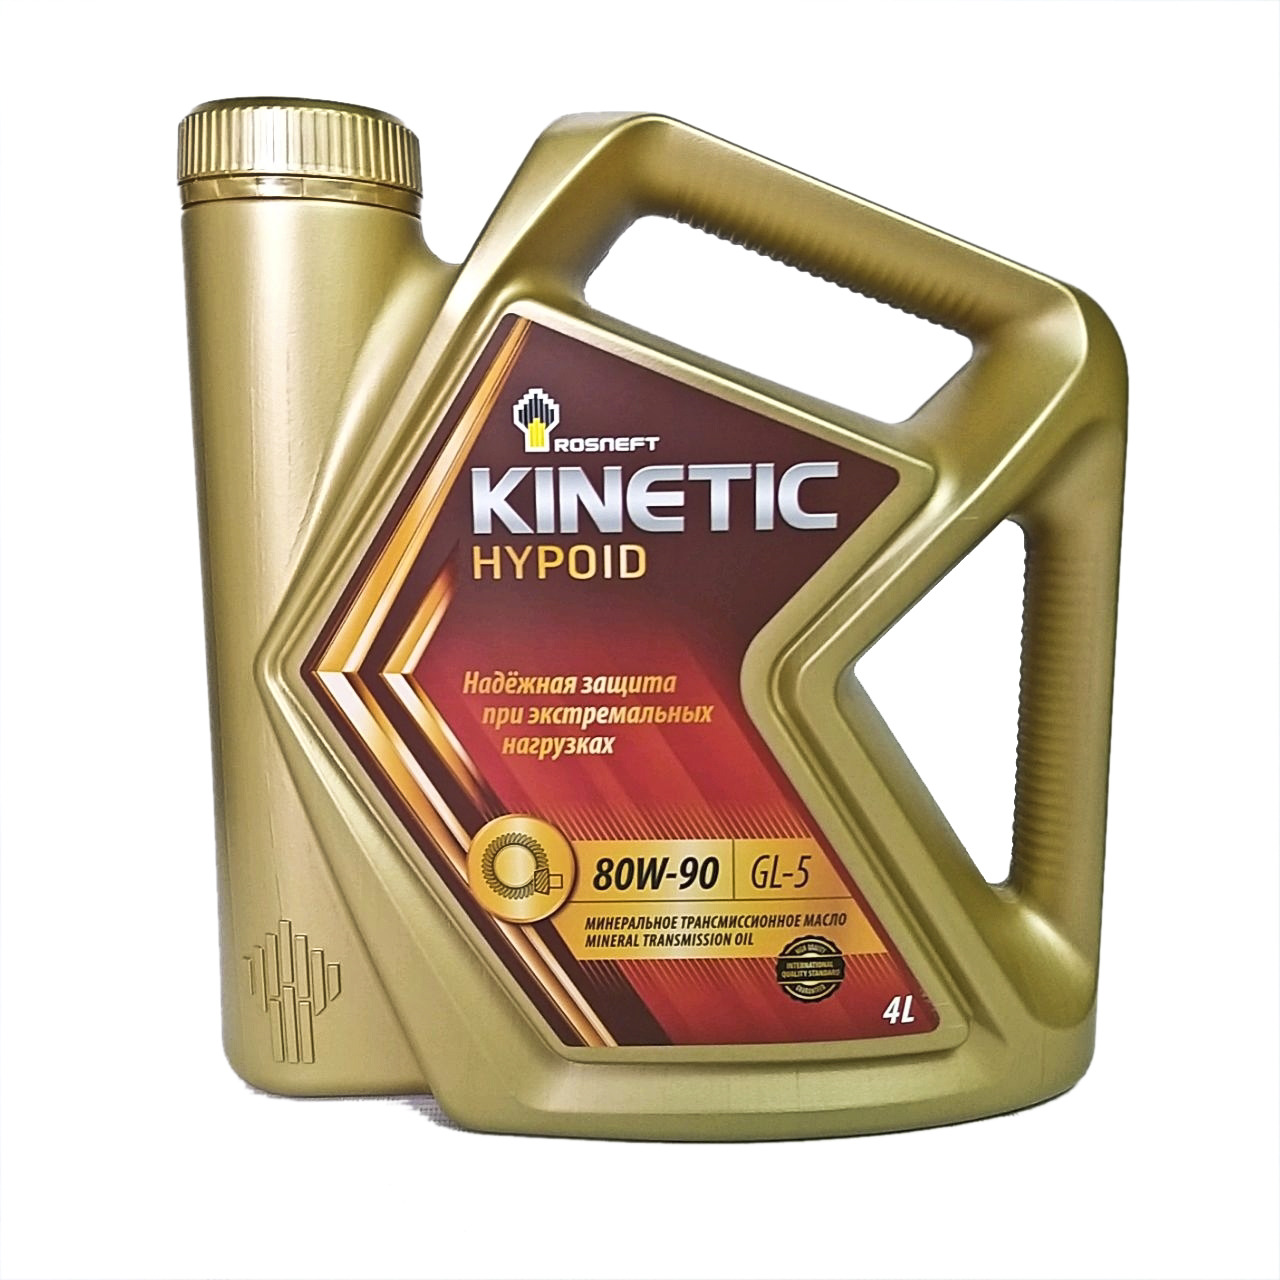 Rosneft Kinetic Hypoid 80w-90 (GL-5) 4л.